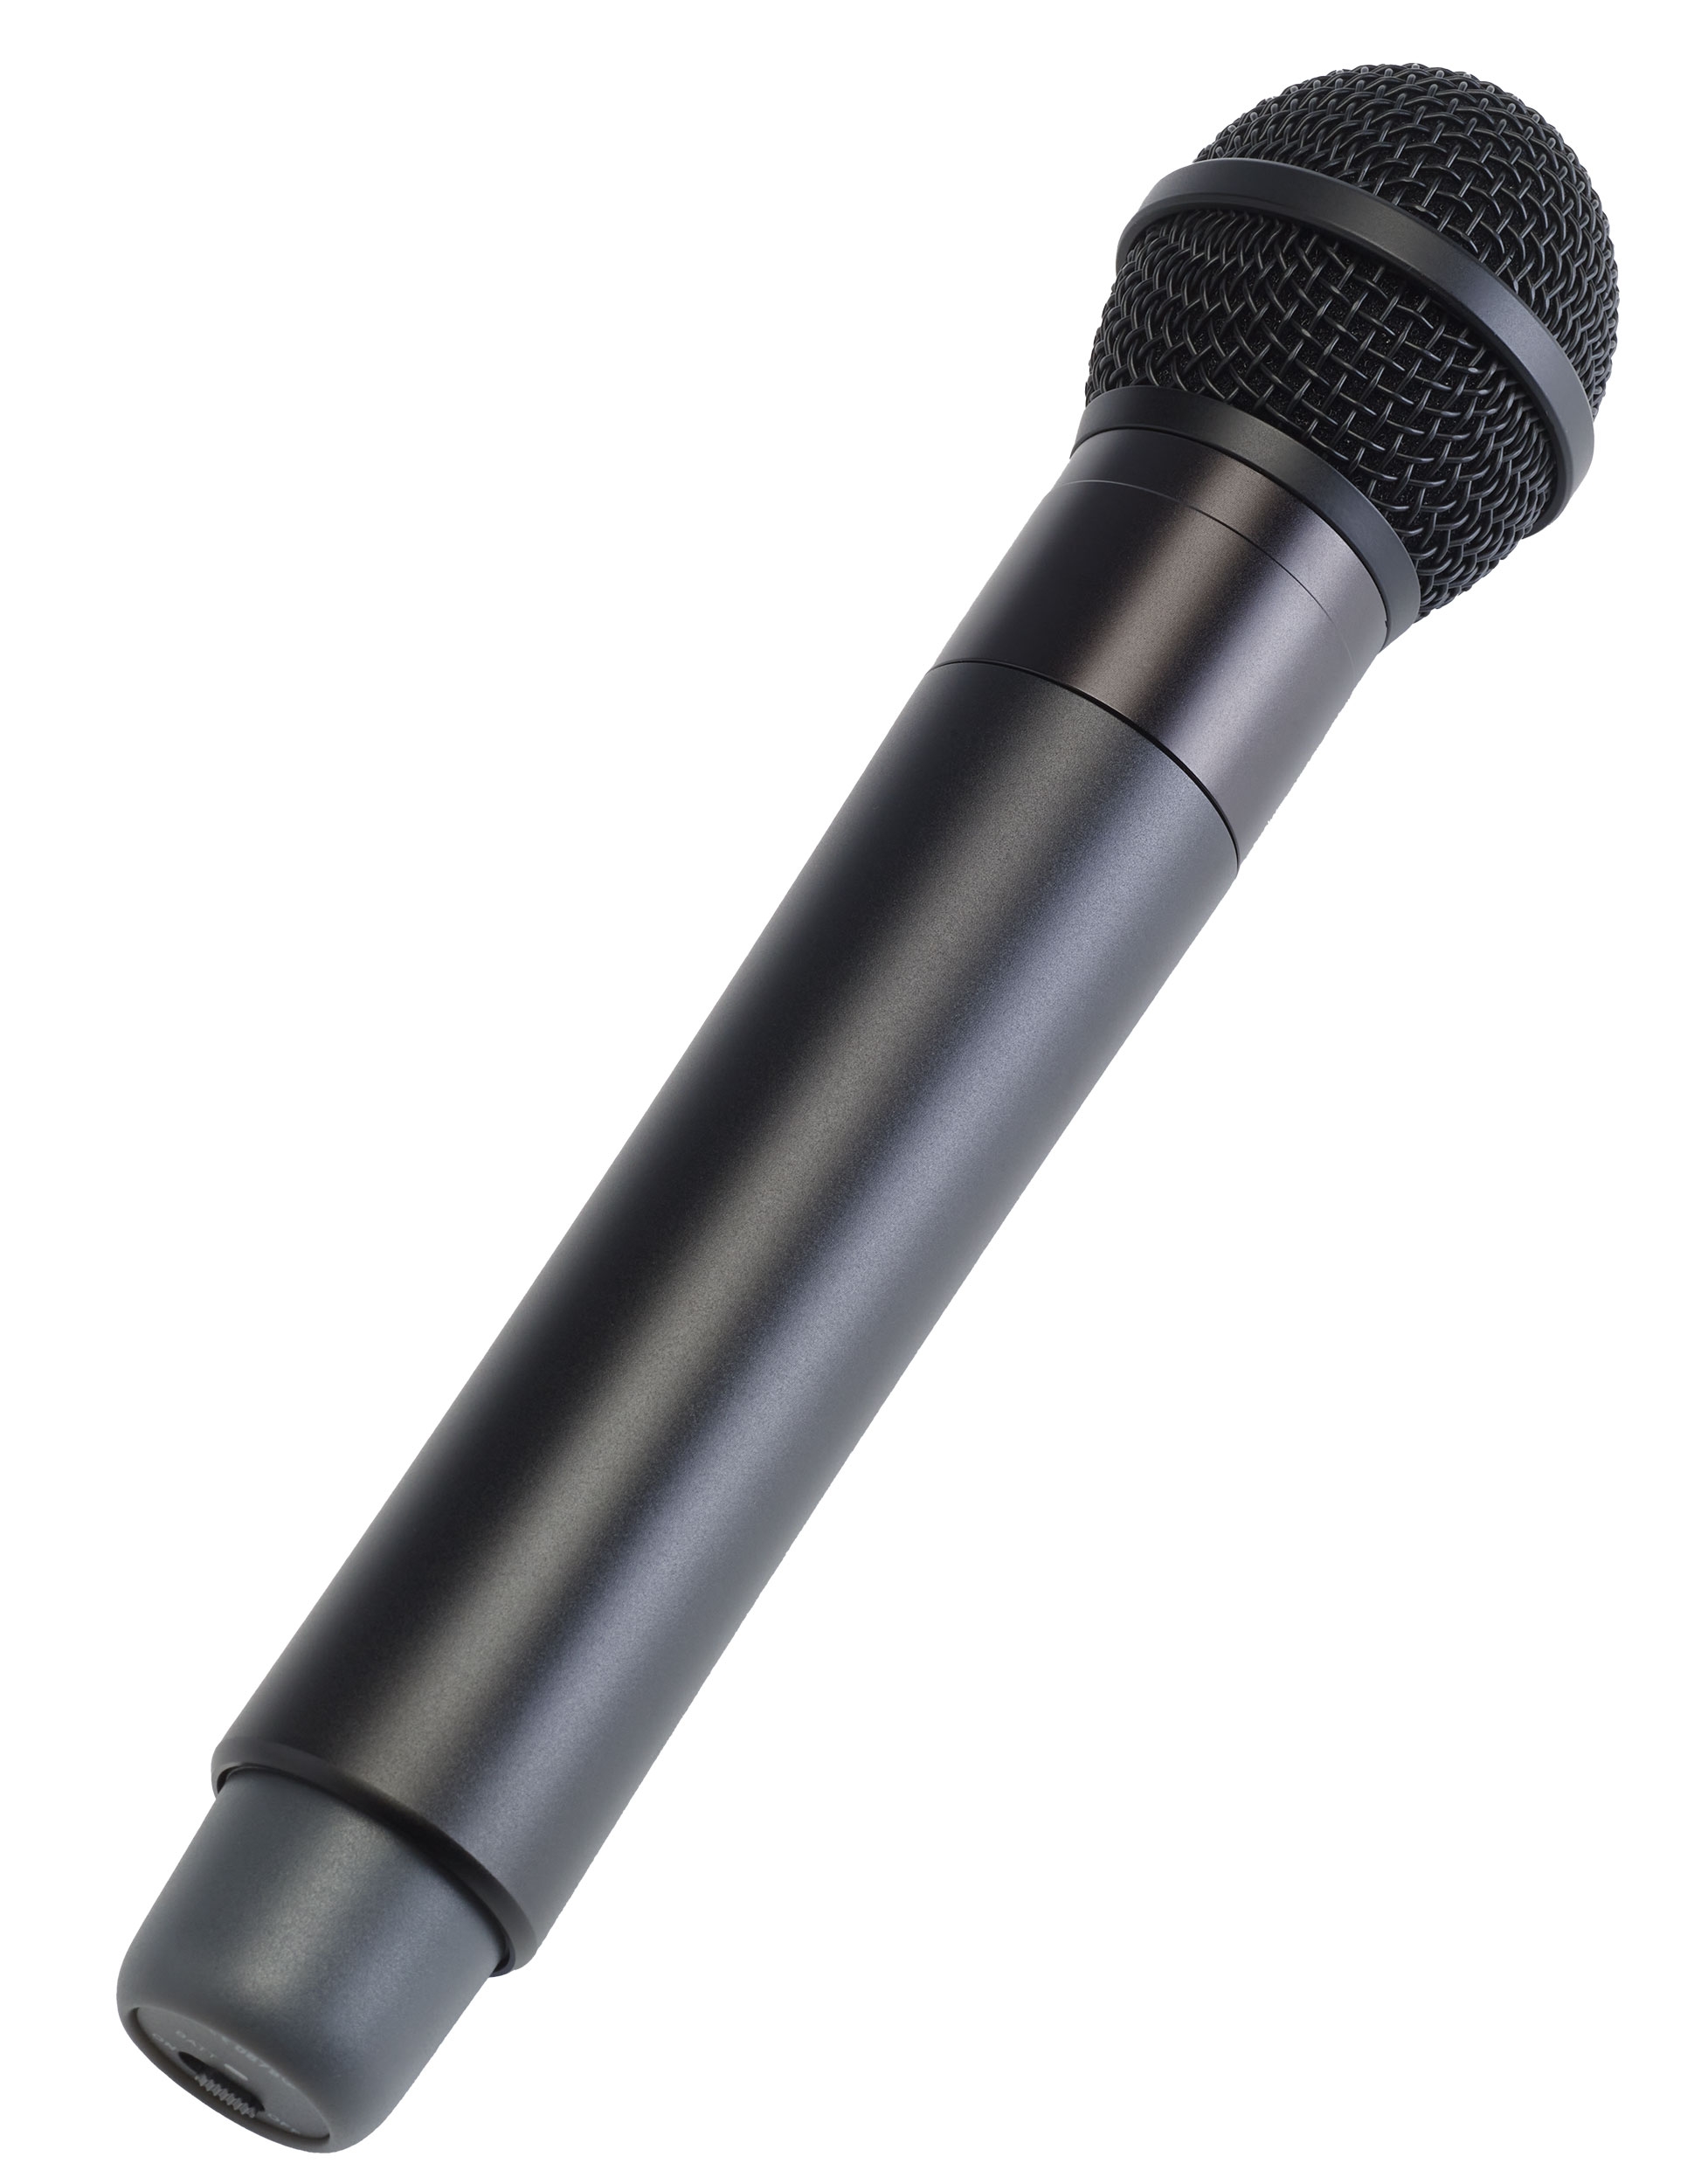 UHF Handheld Microphone for portable sound system - 500MHz